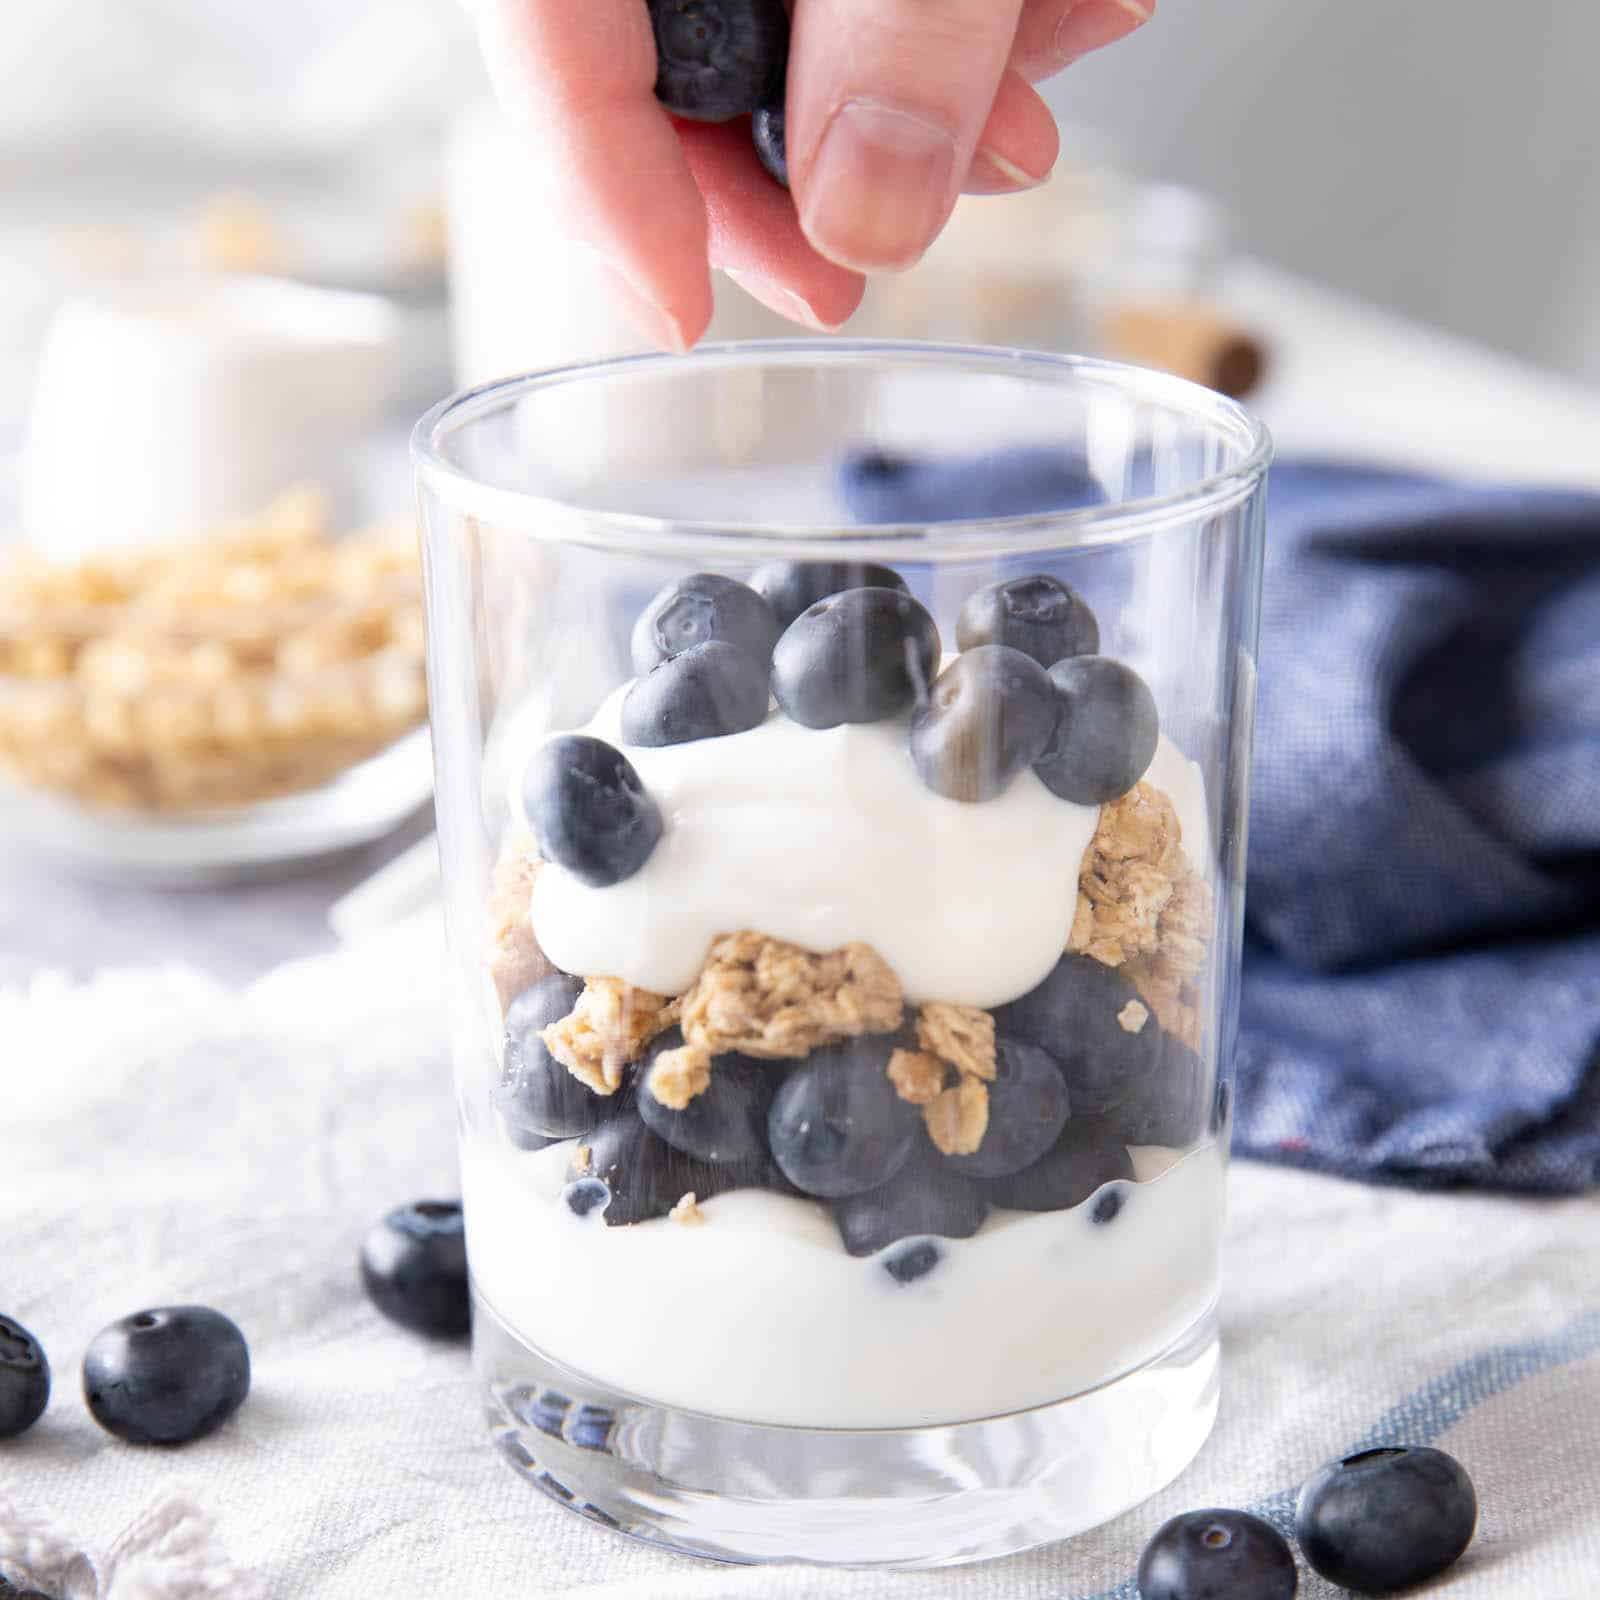 Hand dropping fresh blueberries over layers of yogurt, granola, and blueberries into a glass